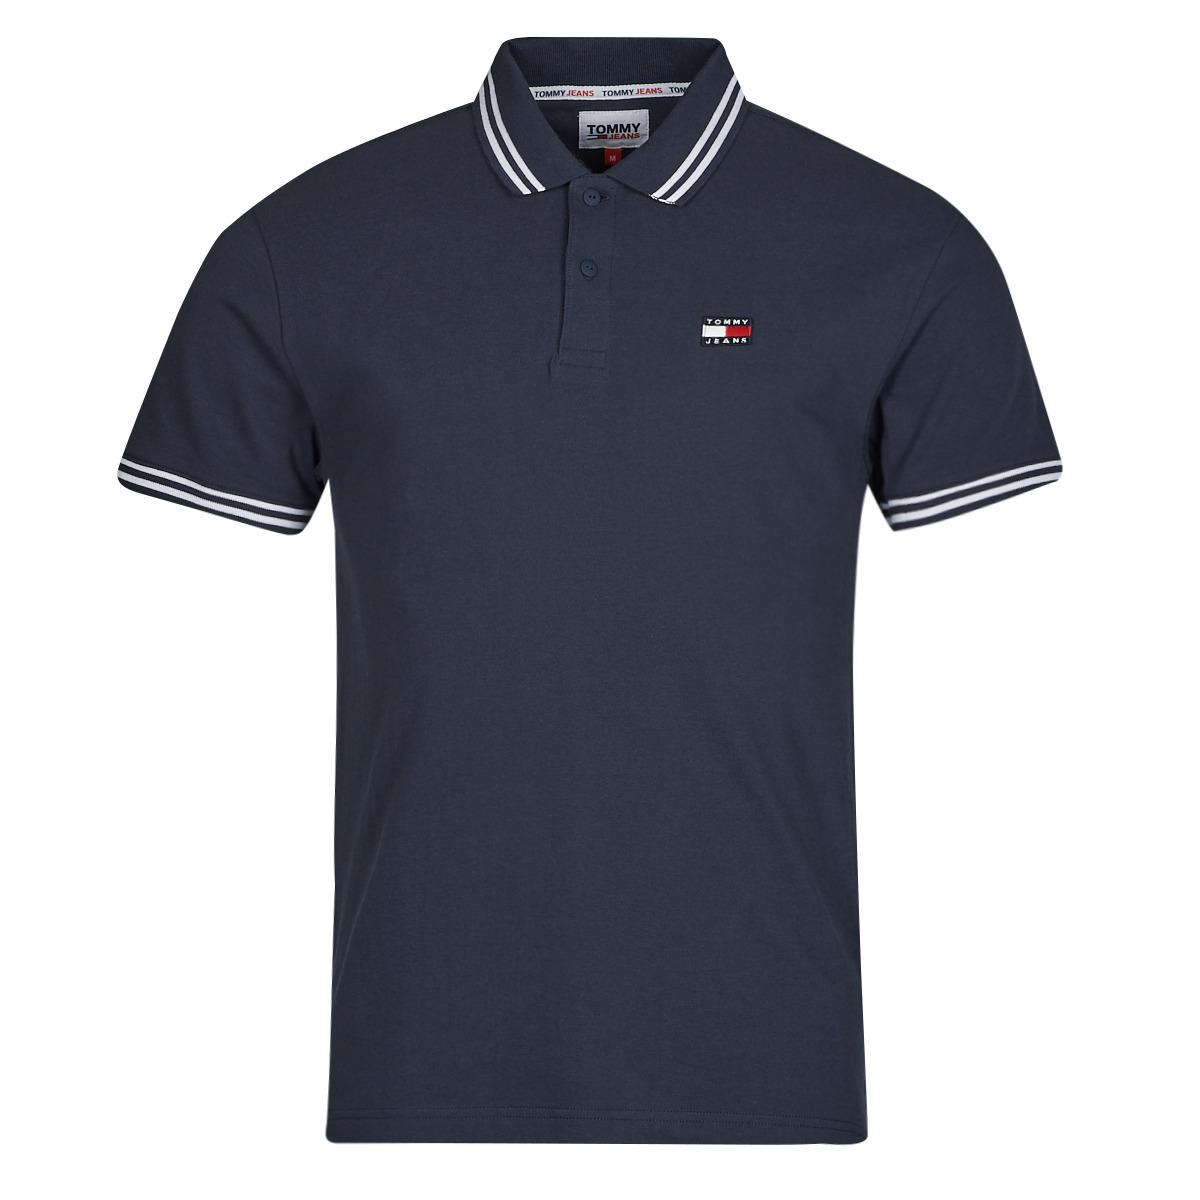 Tommy Spartoo Men delivery polo short-sleeved DETAIL Clothing Free Jeans Marine - ! POLO | shirts TJM - TIPPING CLSC NET